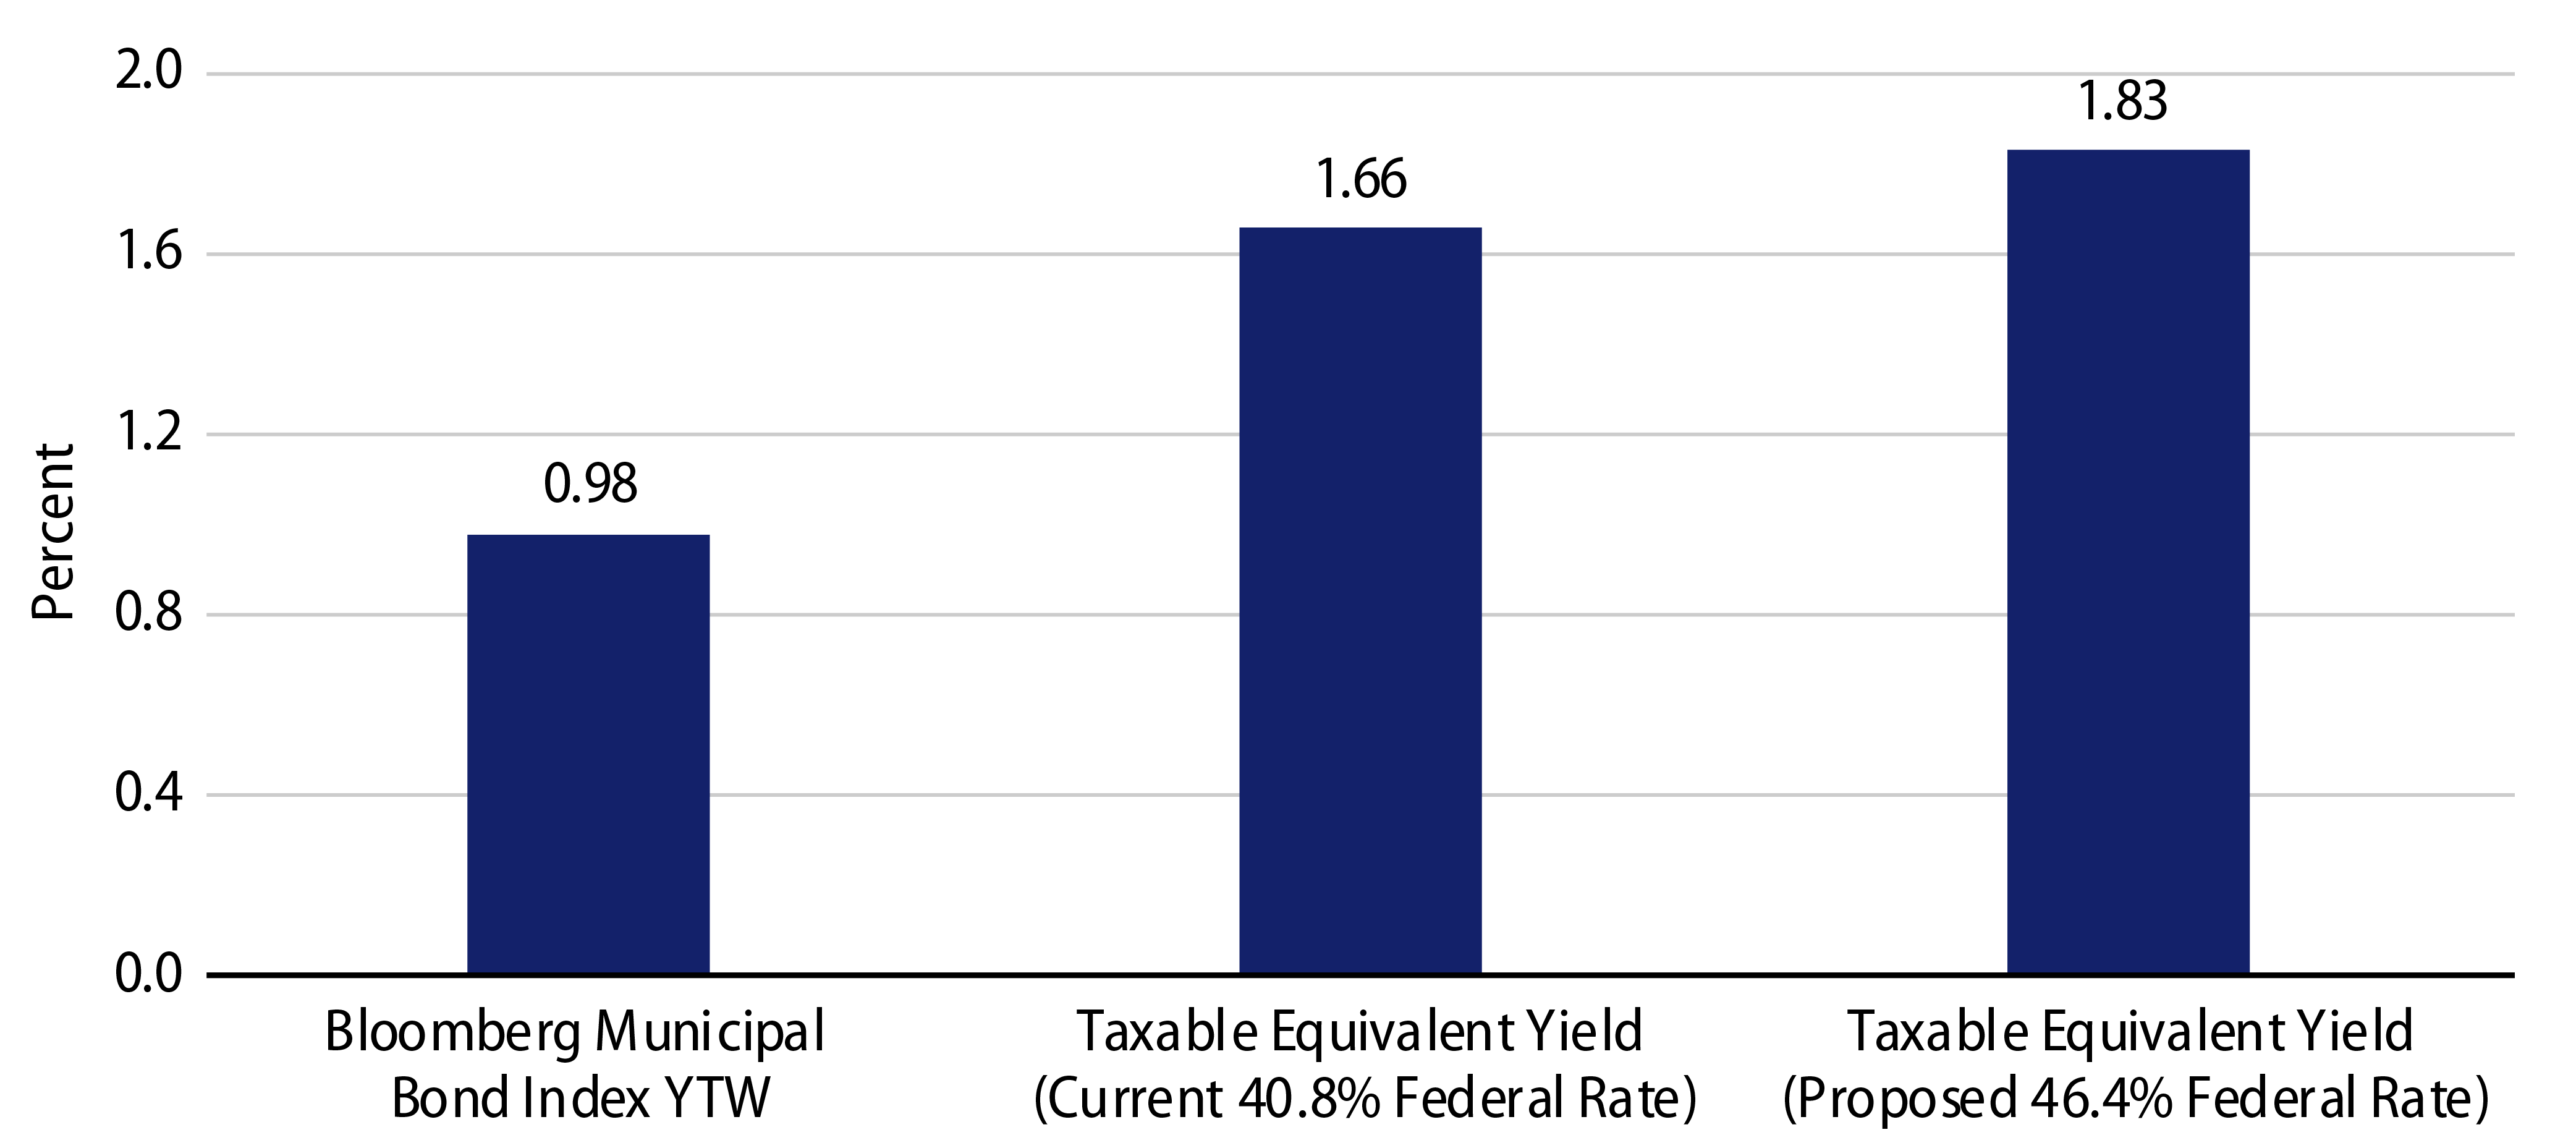 Tax Provision Impact on Tax-Exempt Municipal Valuations